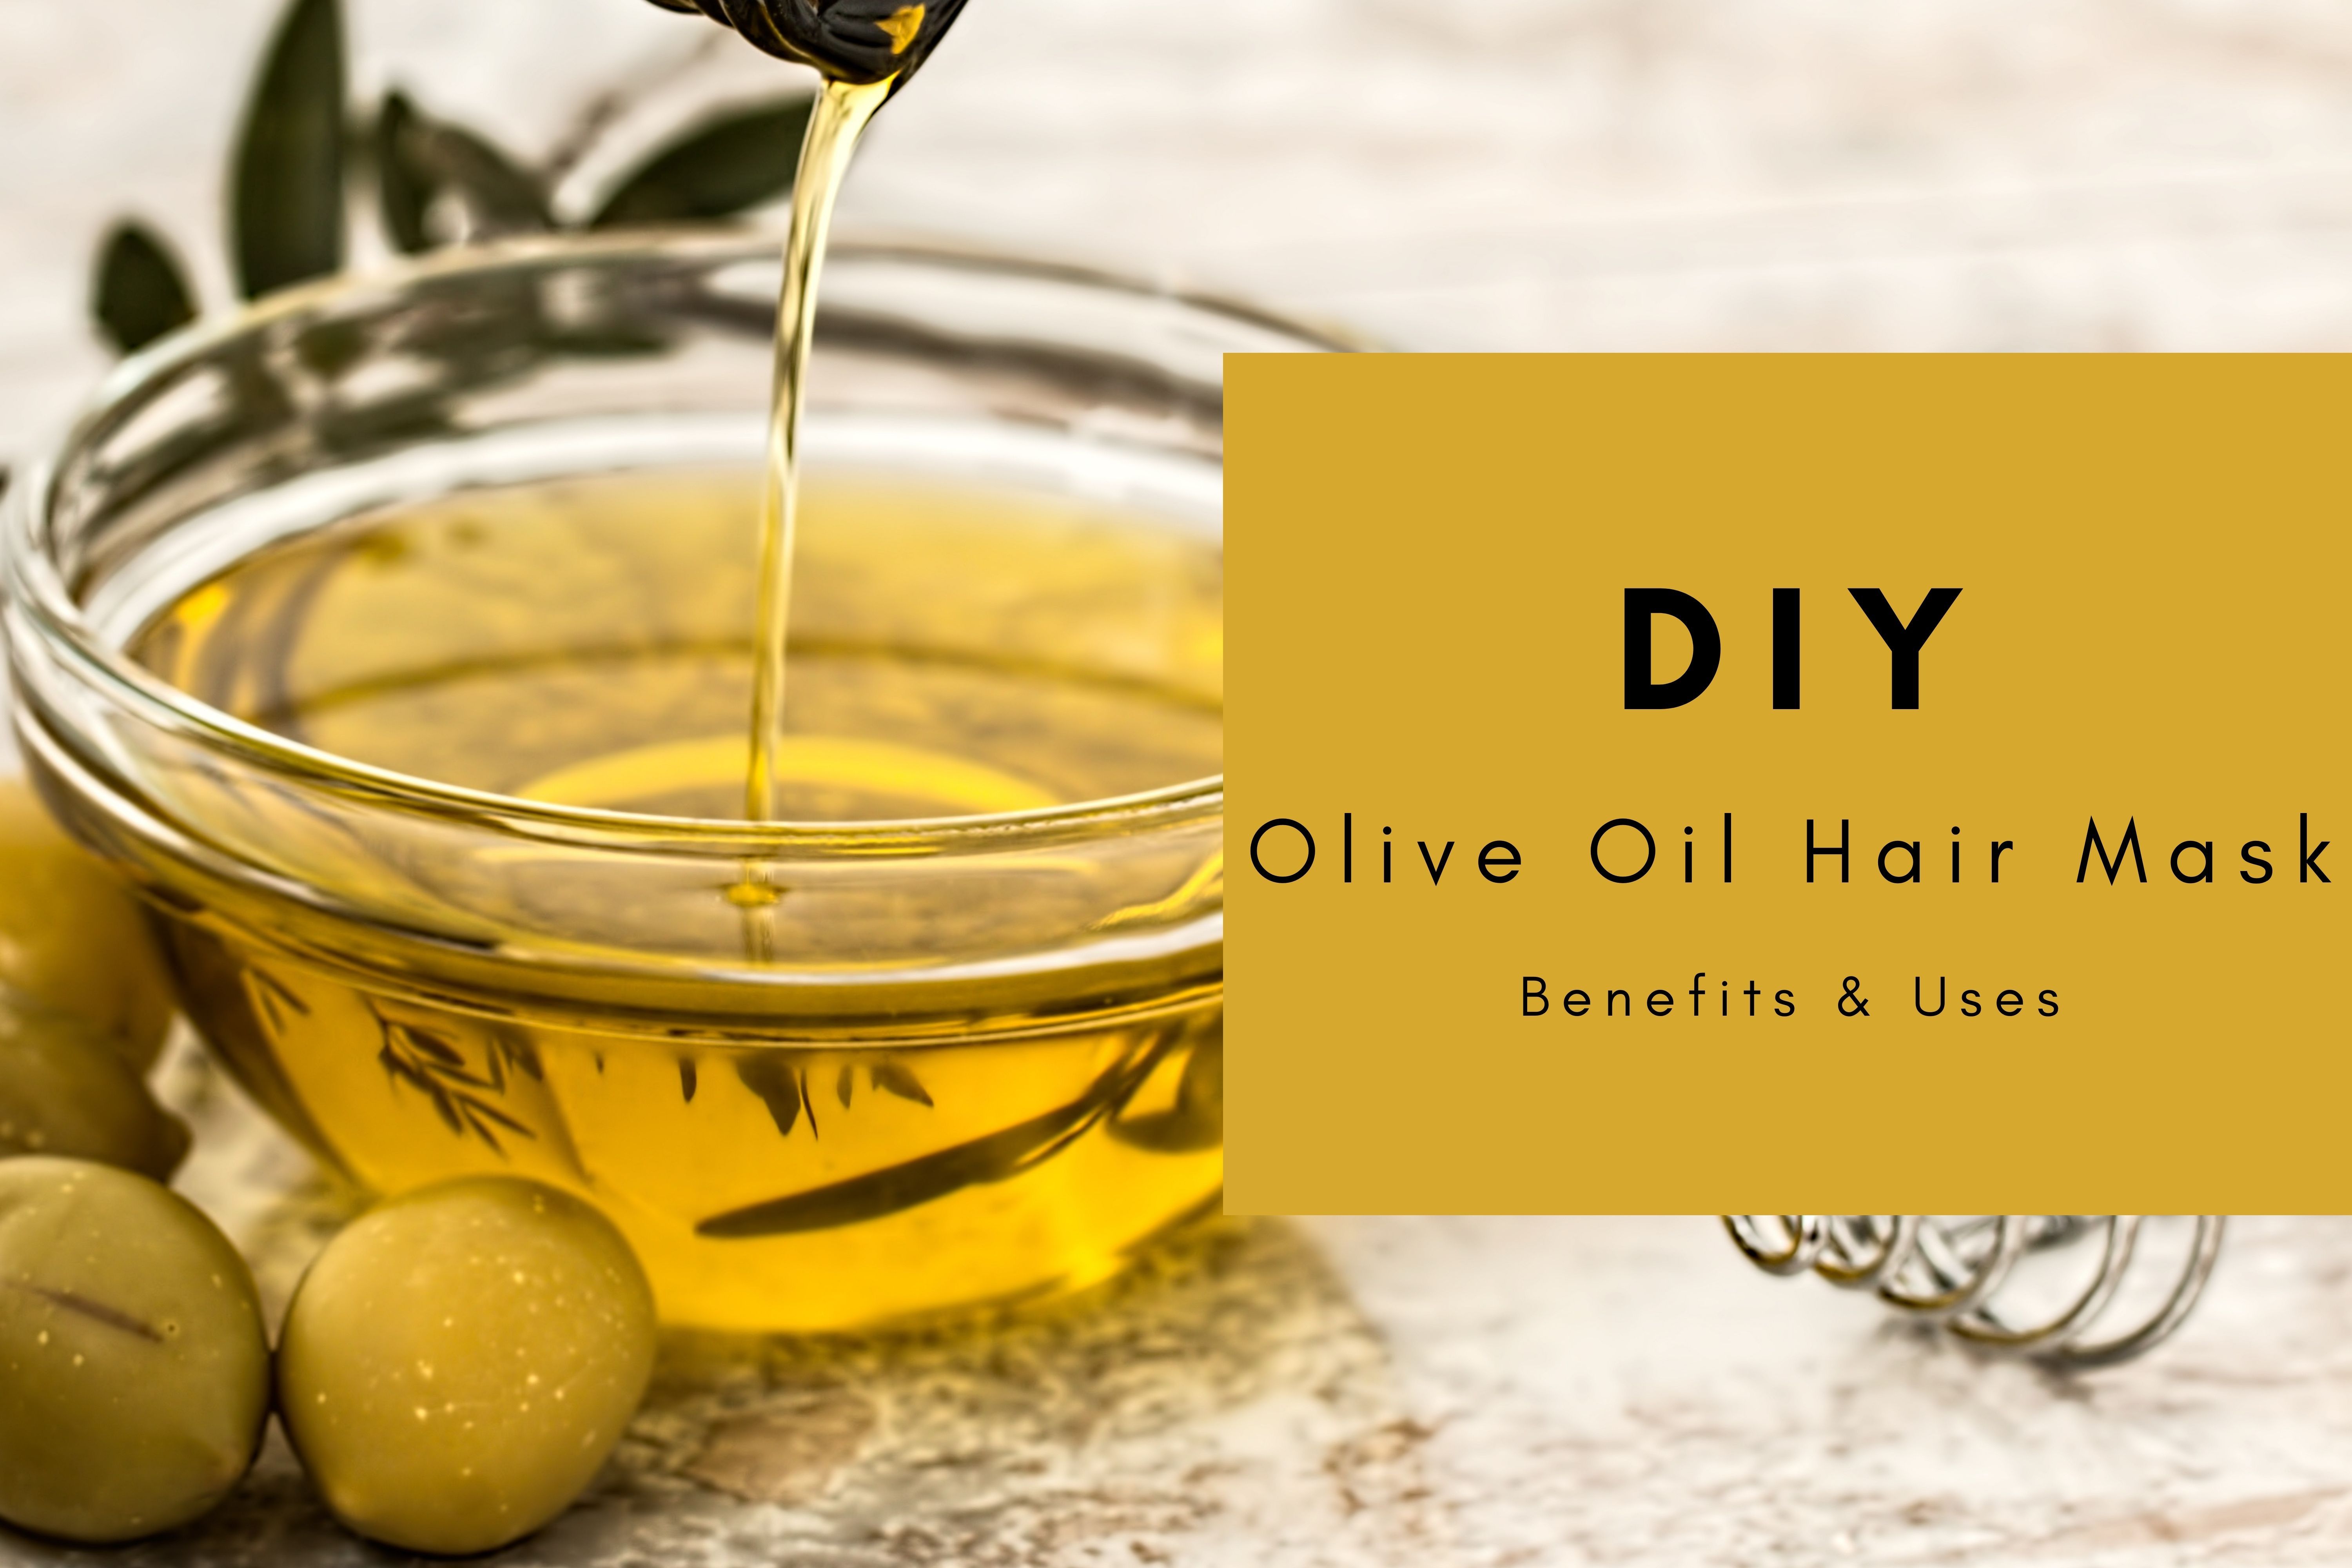 Olive Oil for Hair: Benefits, Uses, and DIY Recipes